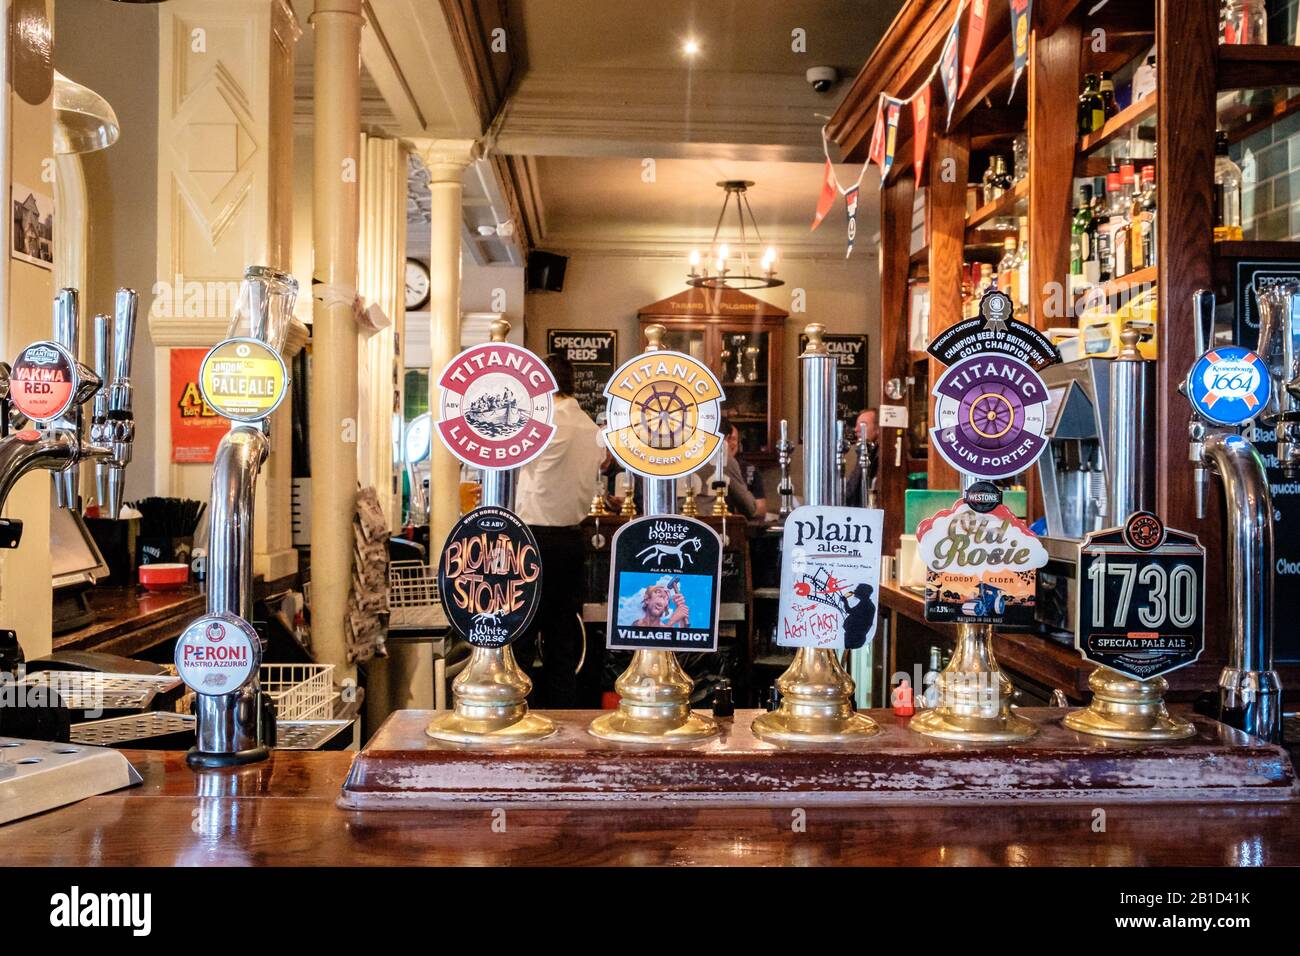 The Tabard Pub in Chiswick, London, famous for serving branded draught beers. Stock Photo